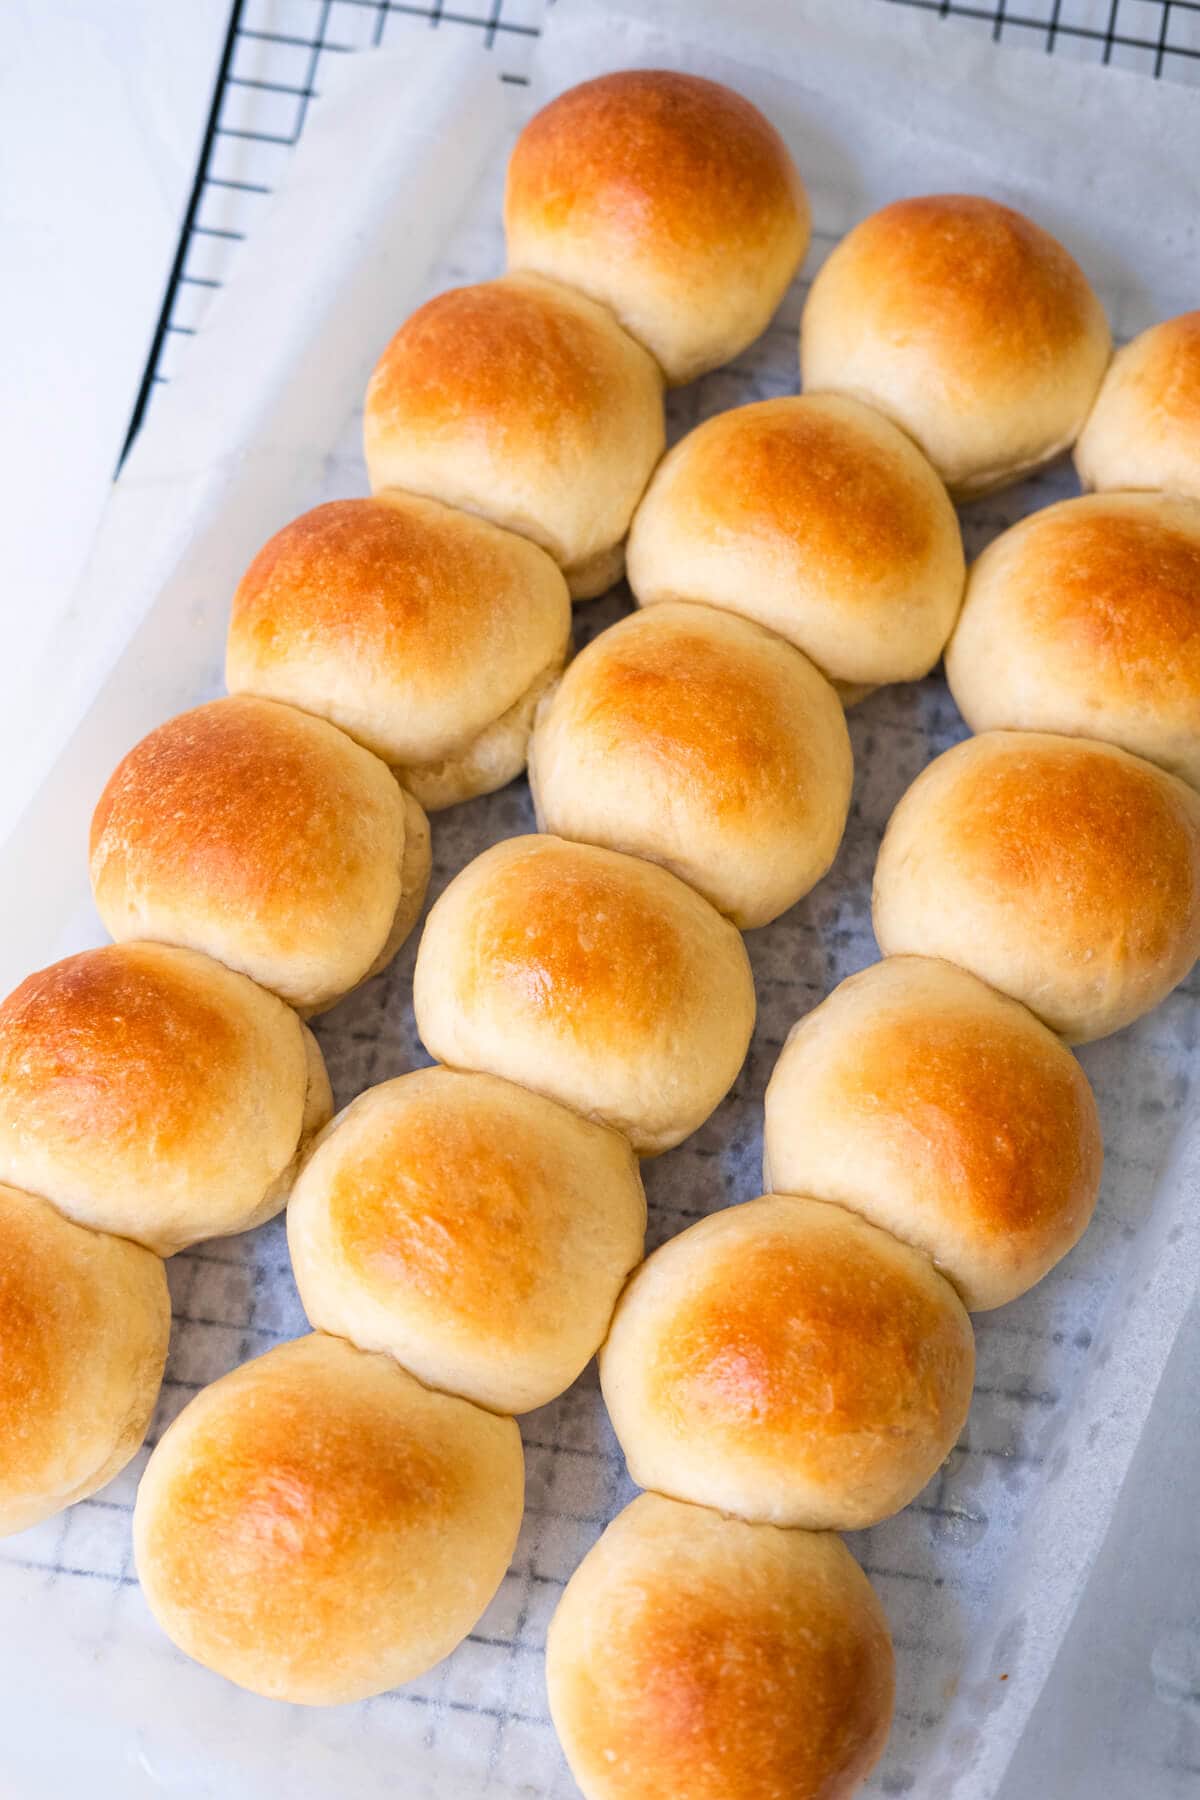 Slider buns on a wire rack lined with parchment paper.